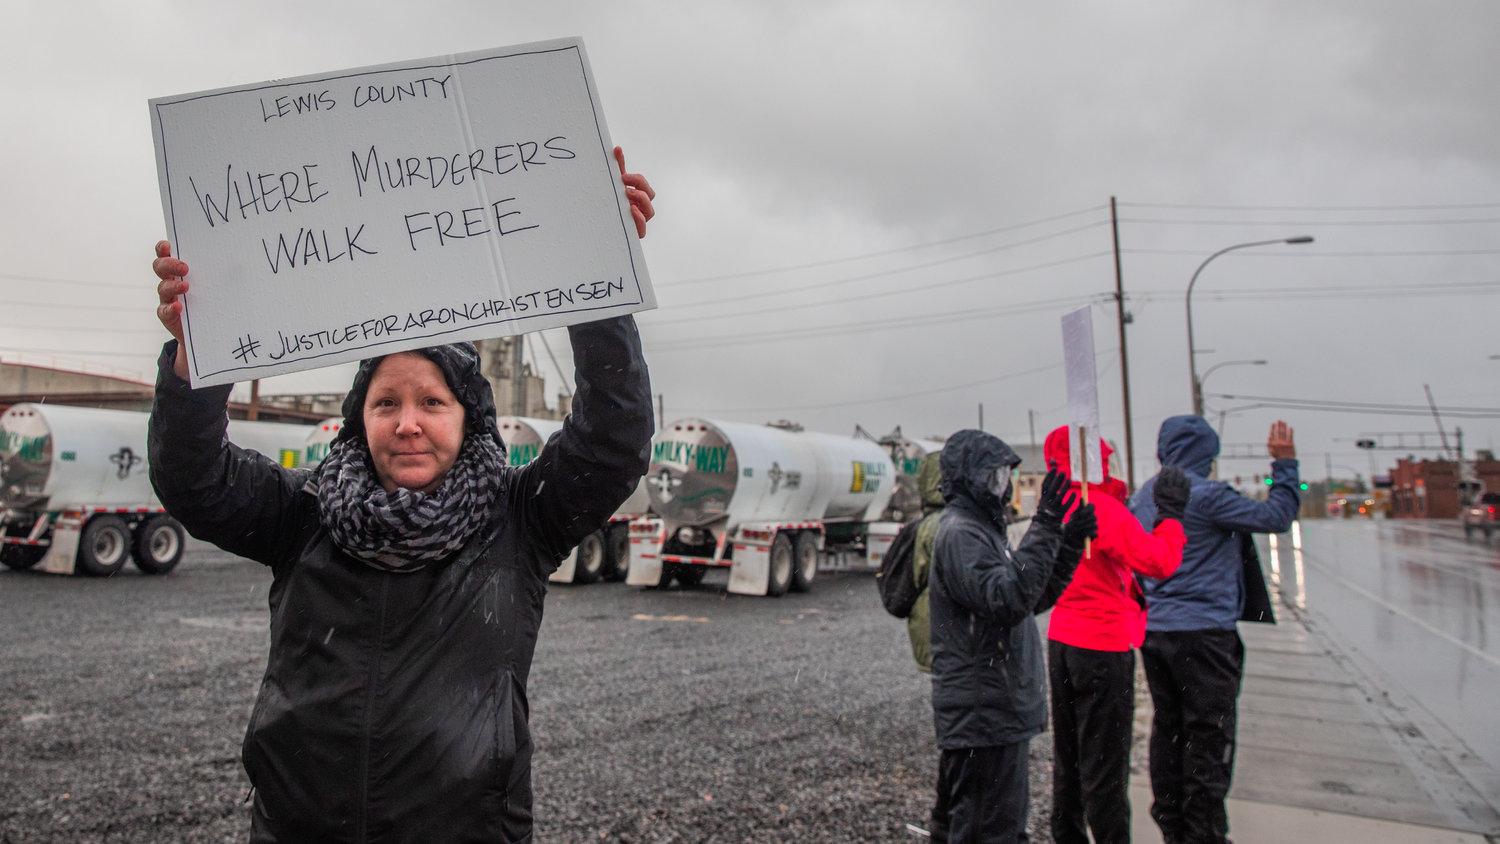 Demonstrators stand in the rain outside the Lewis County Law and Justice Center in Chehalis on Saturday while demanding justice for Aron Christensen.